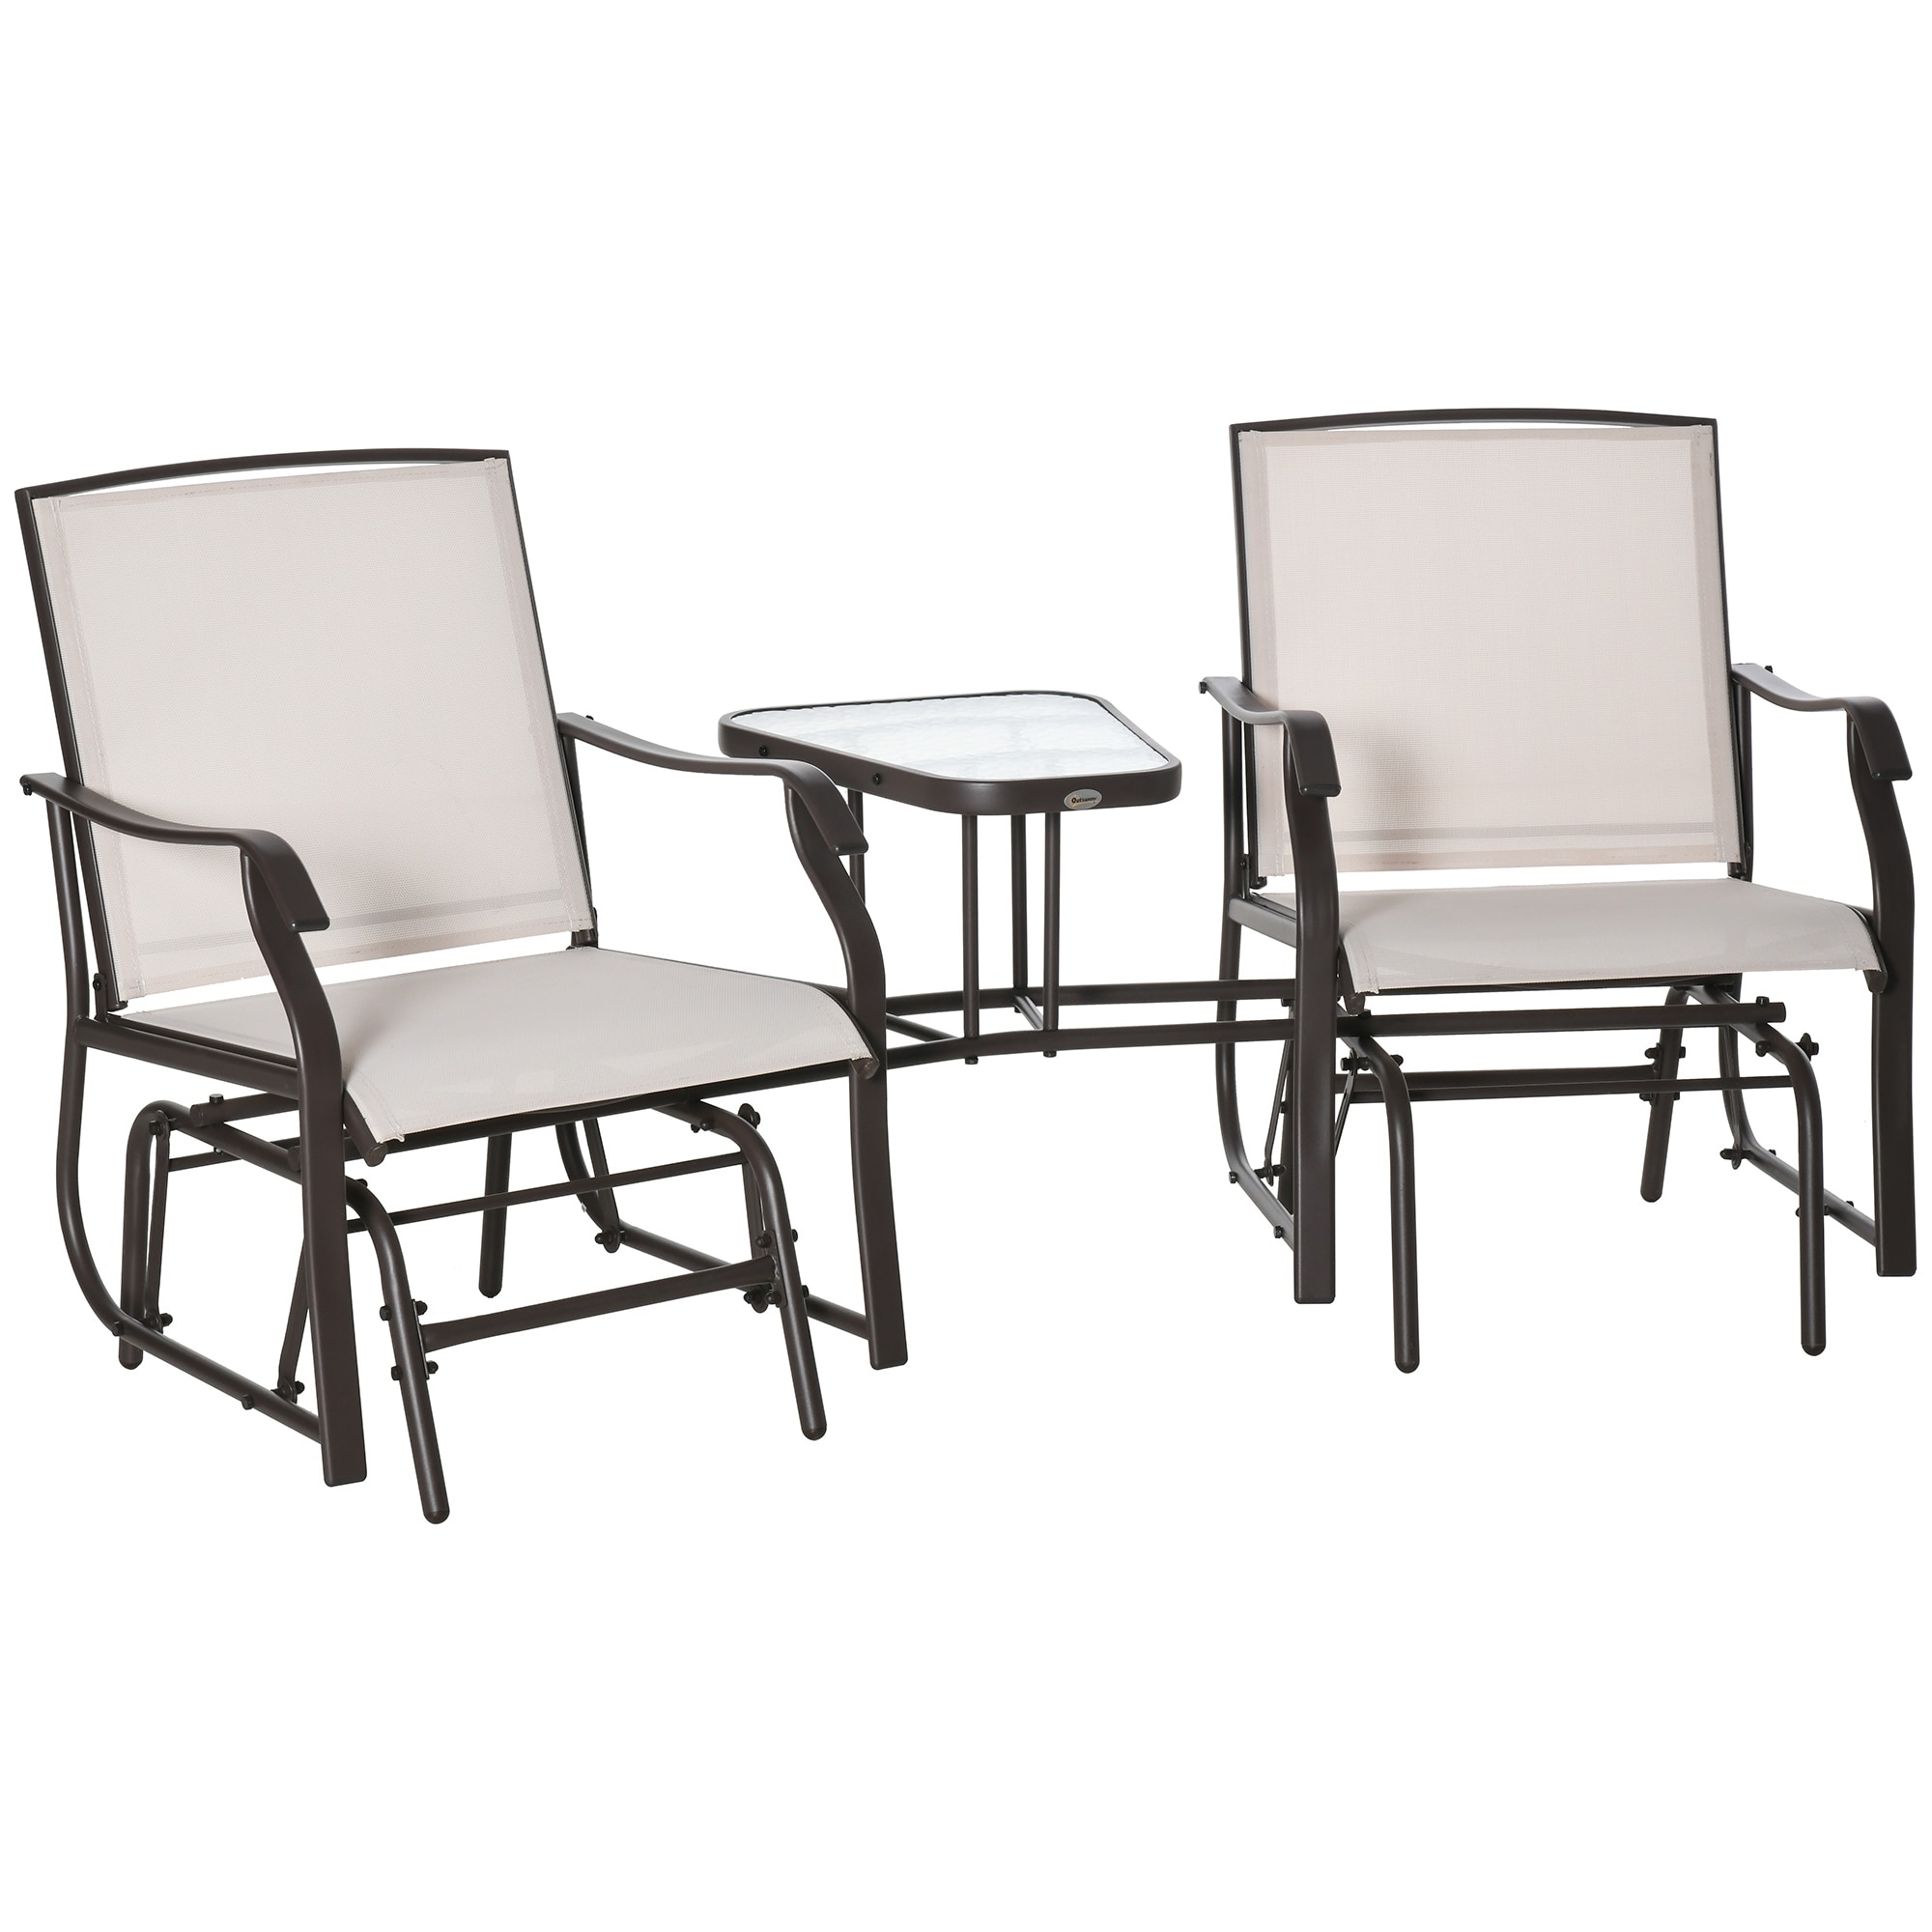 Outsunny 3-pc. Outdoor Sling Fabric Gliding Rocker Chairs W/ Table